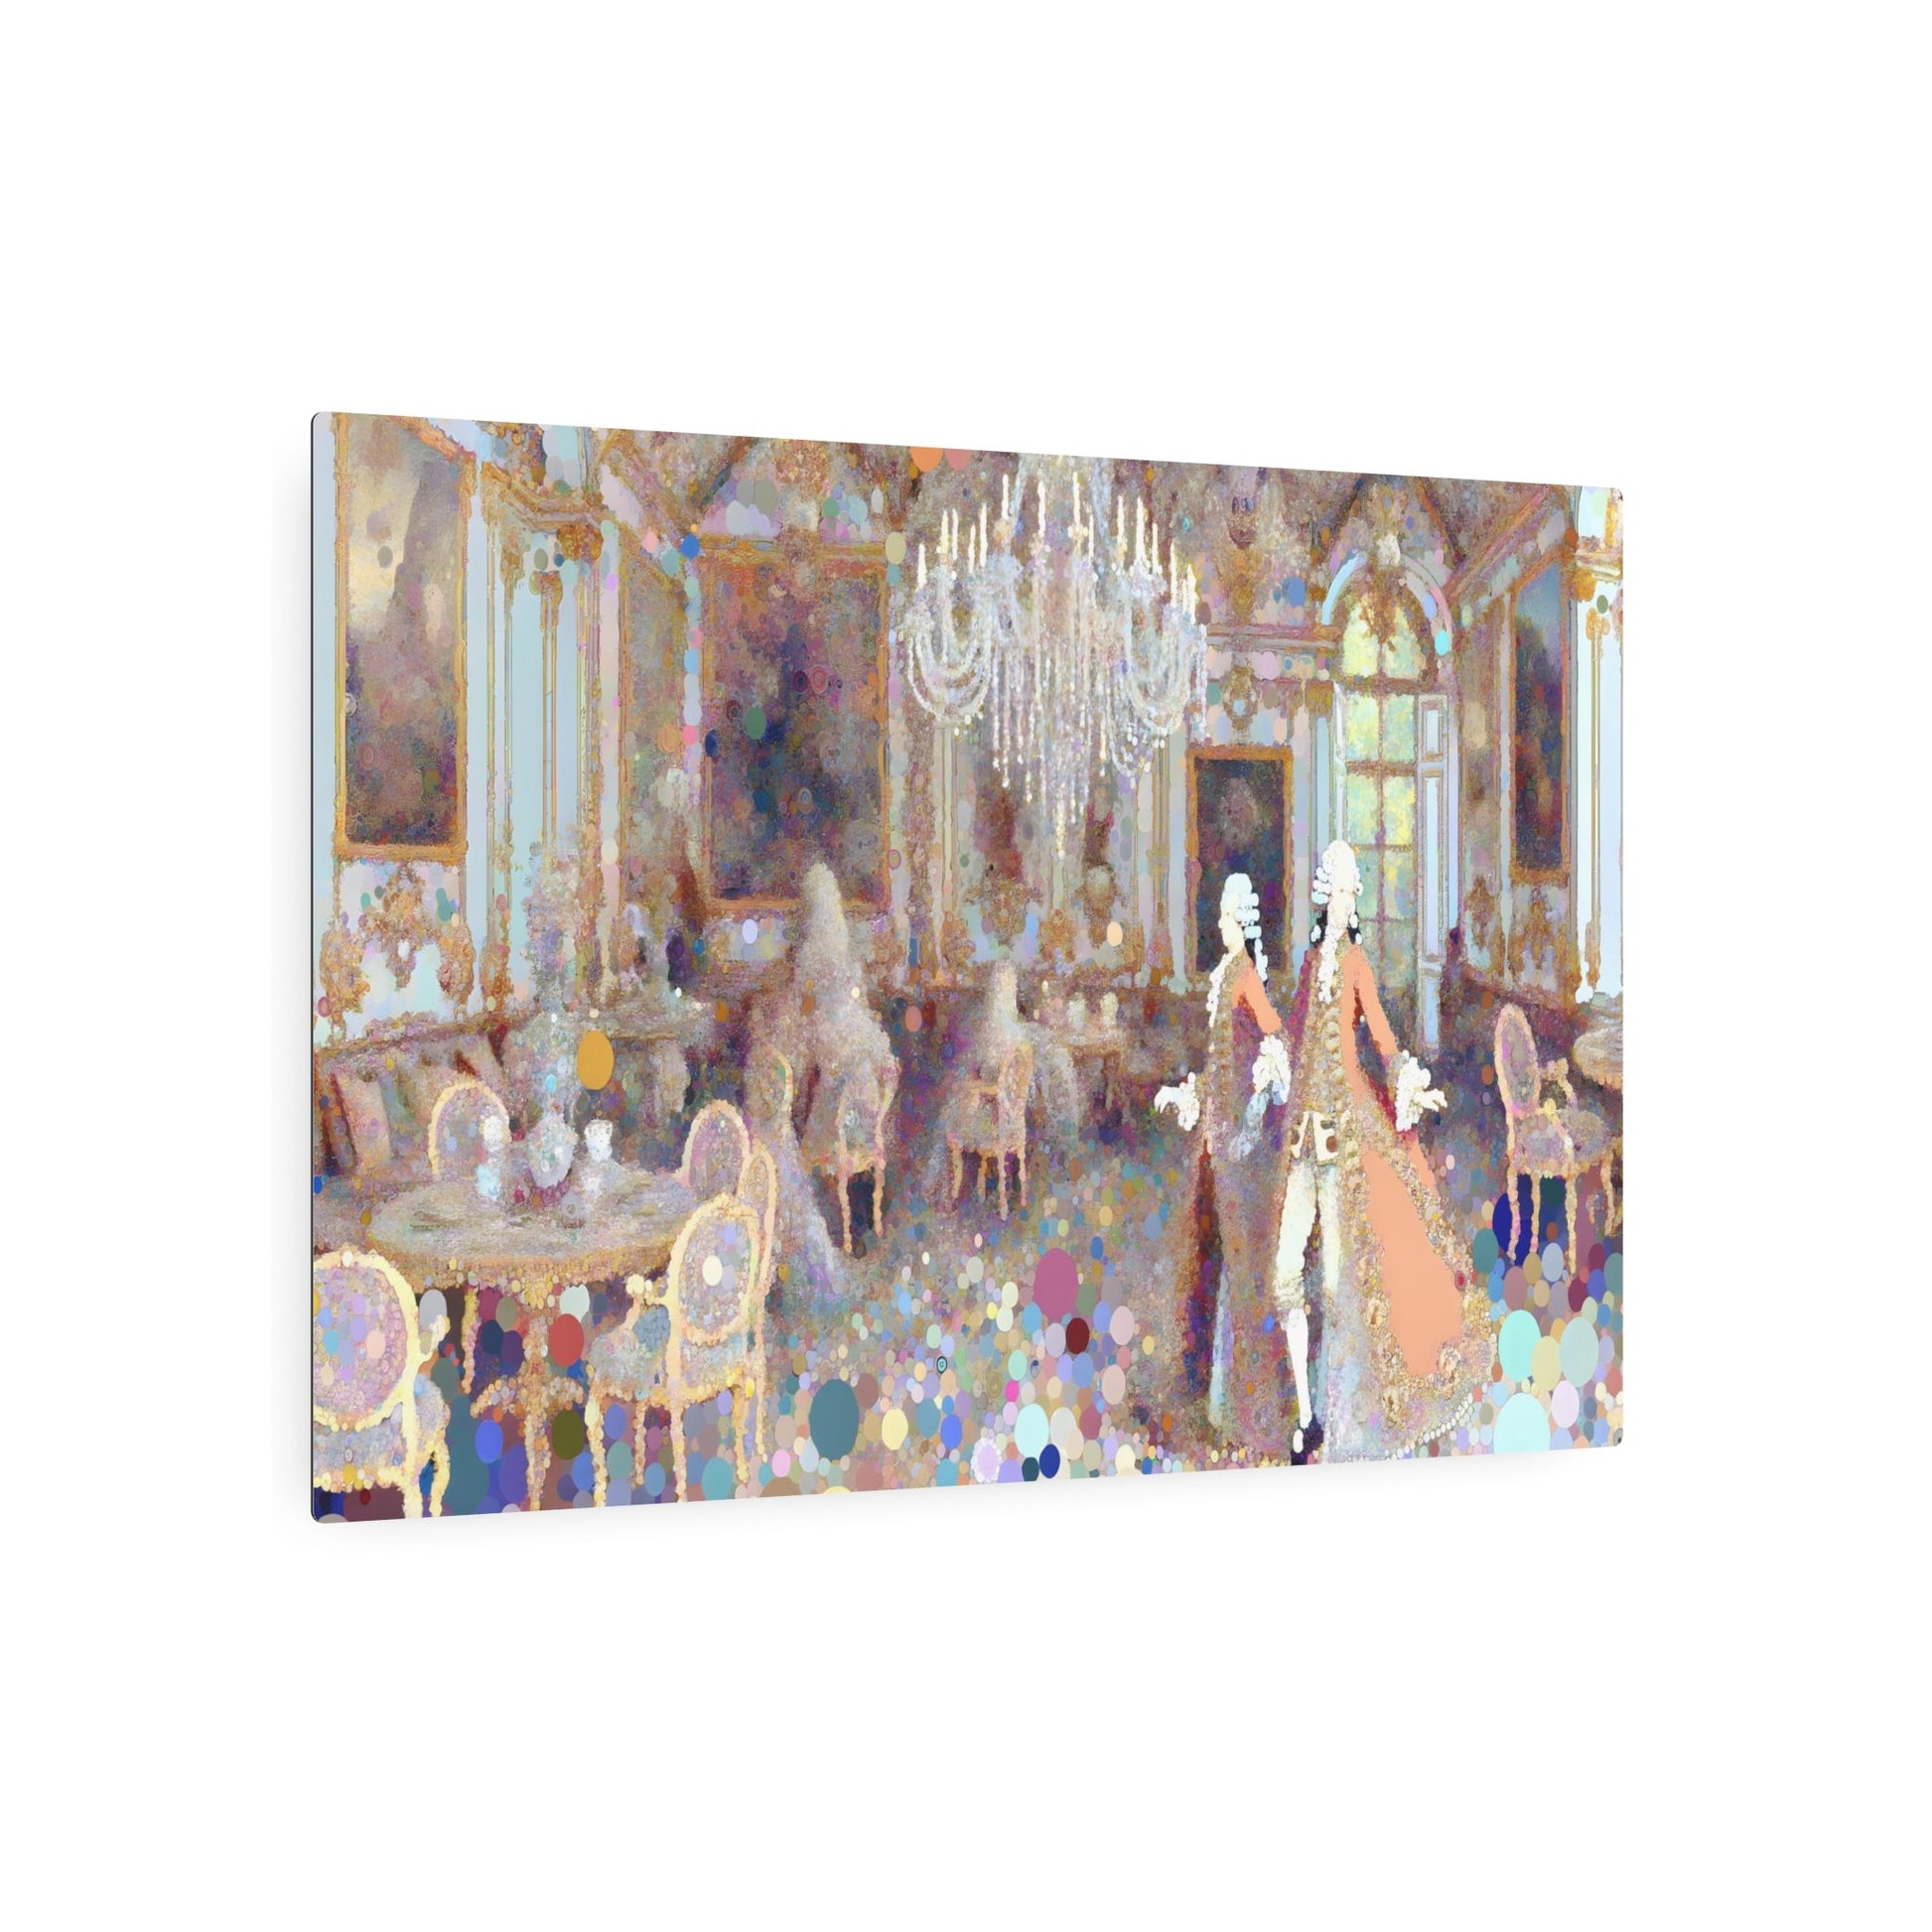 Metal Poster Art | "Rococo Art Style-Inspired Intricate Detail & Playful Themes Western Artwork in Pastel Colors" - Metal Poster Art 36″ x 24″ (Horizontal) 0.12''